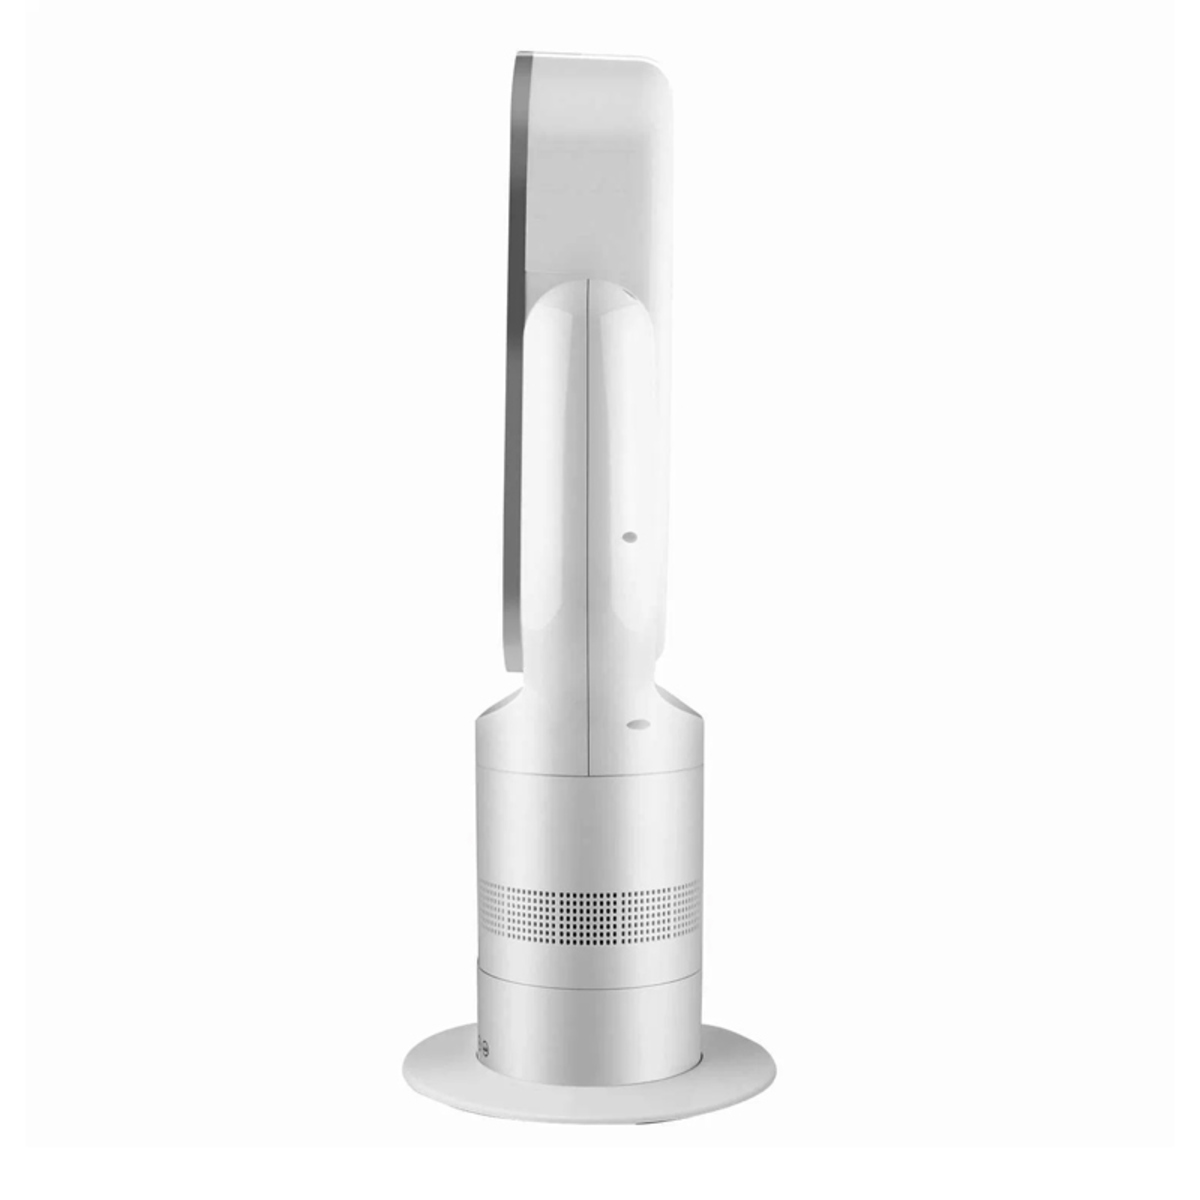 Dyson AM07 Cool tower cooling fan in white/silver